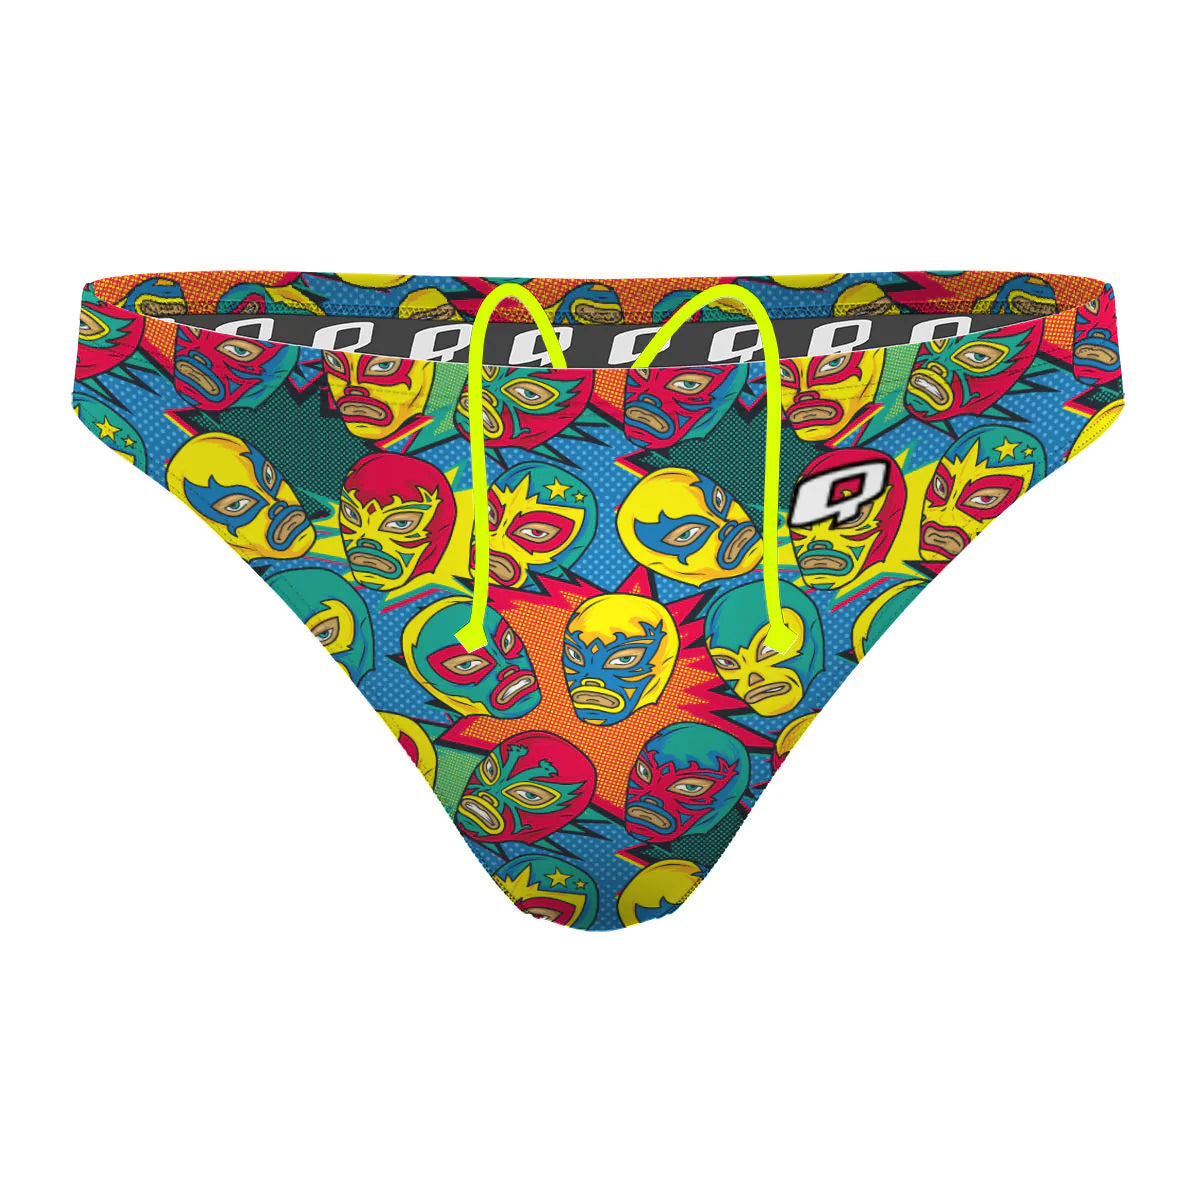 Comic Wrestling Masks - Waterpolo Brief Swimsuit